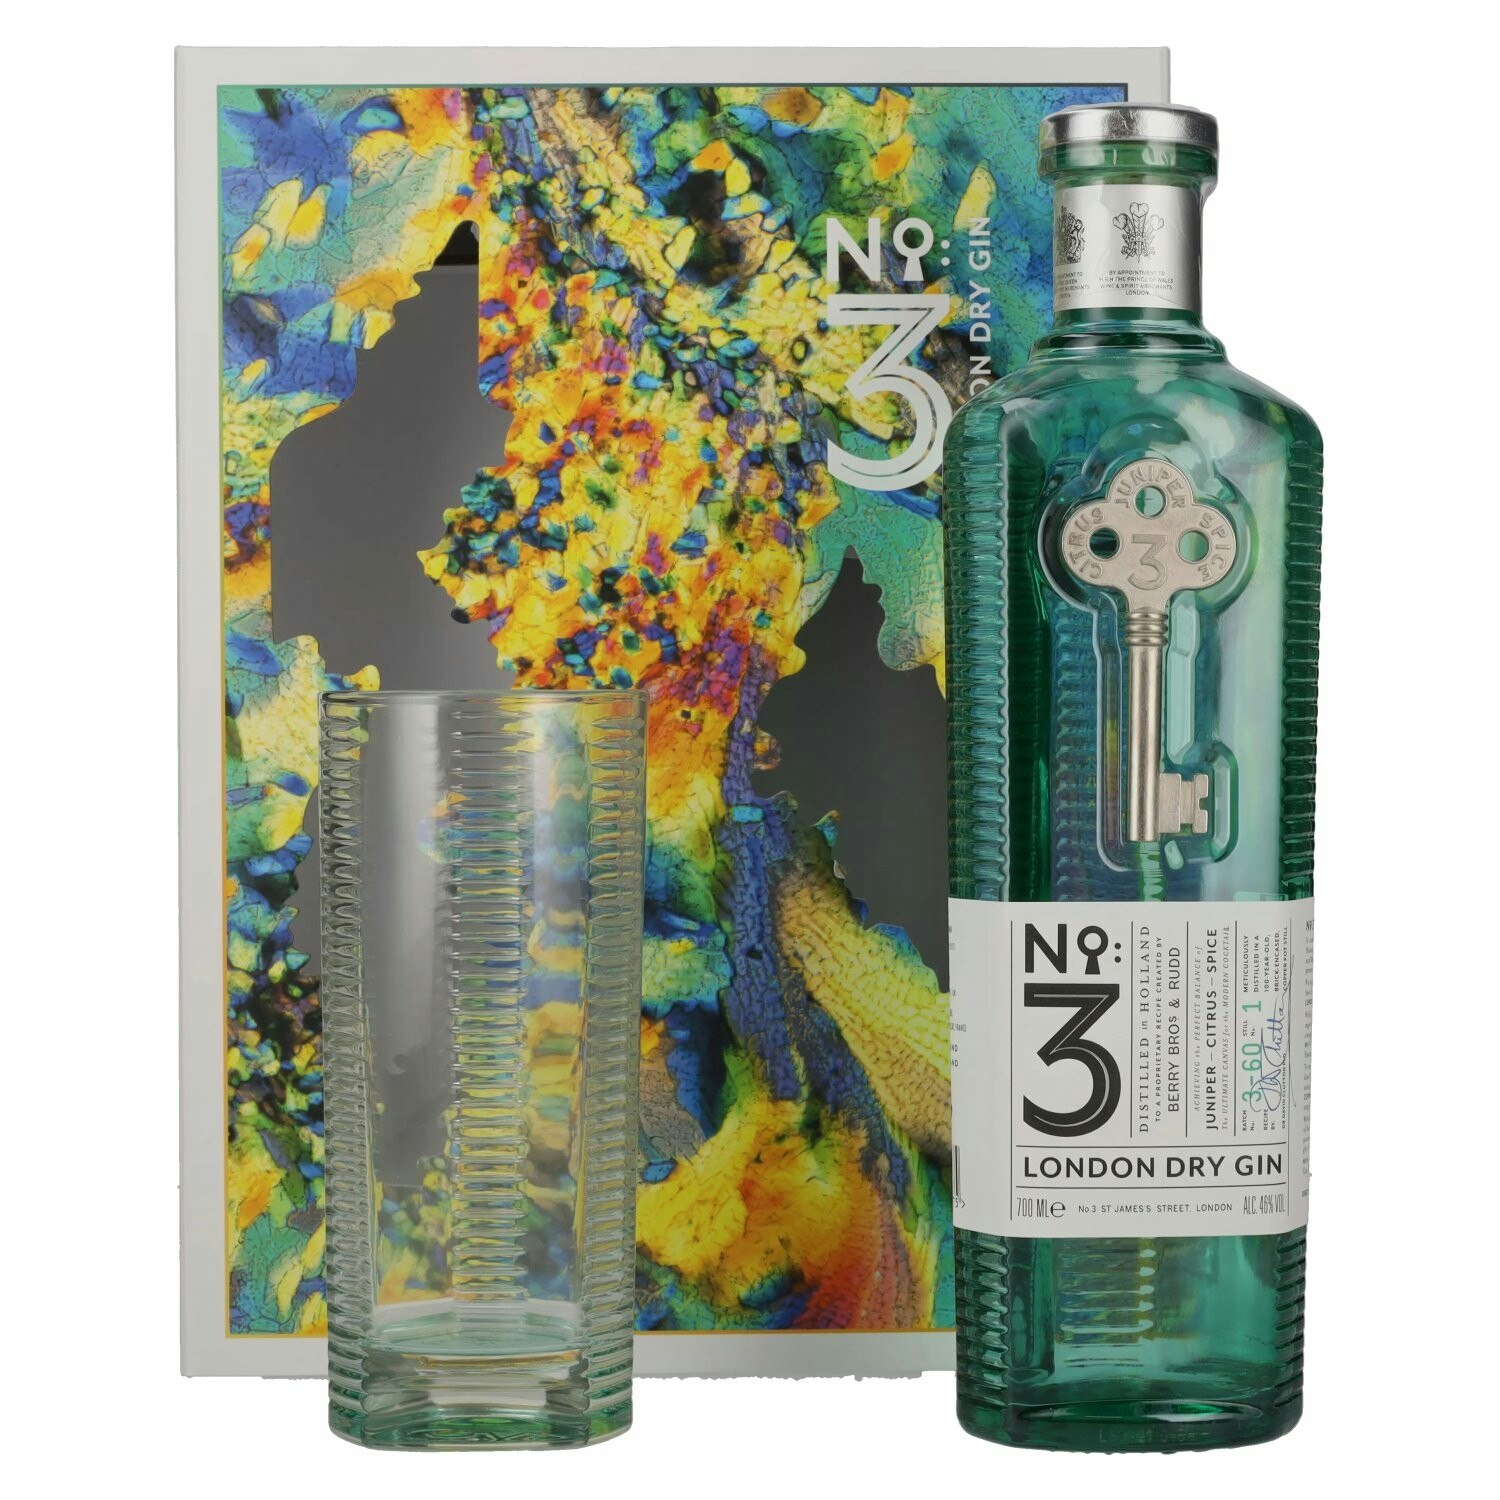 No. 3 London Dry Gin 46% Vol. 0,7l in Giftbox with glass